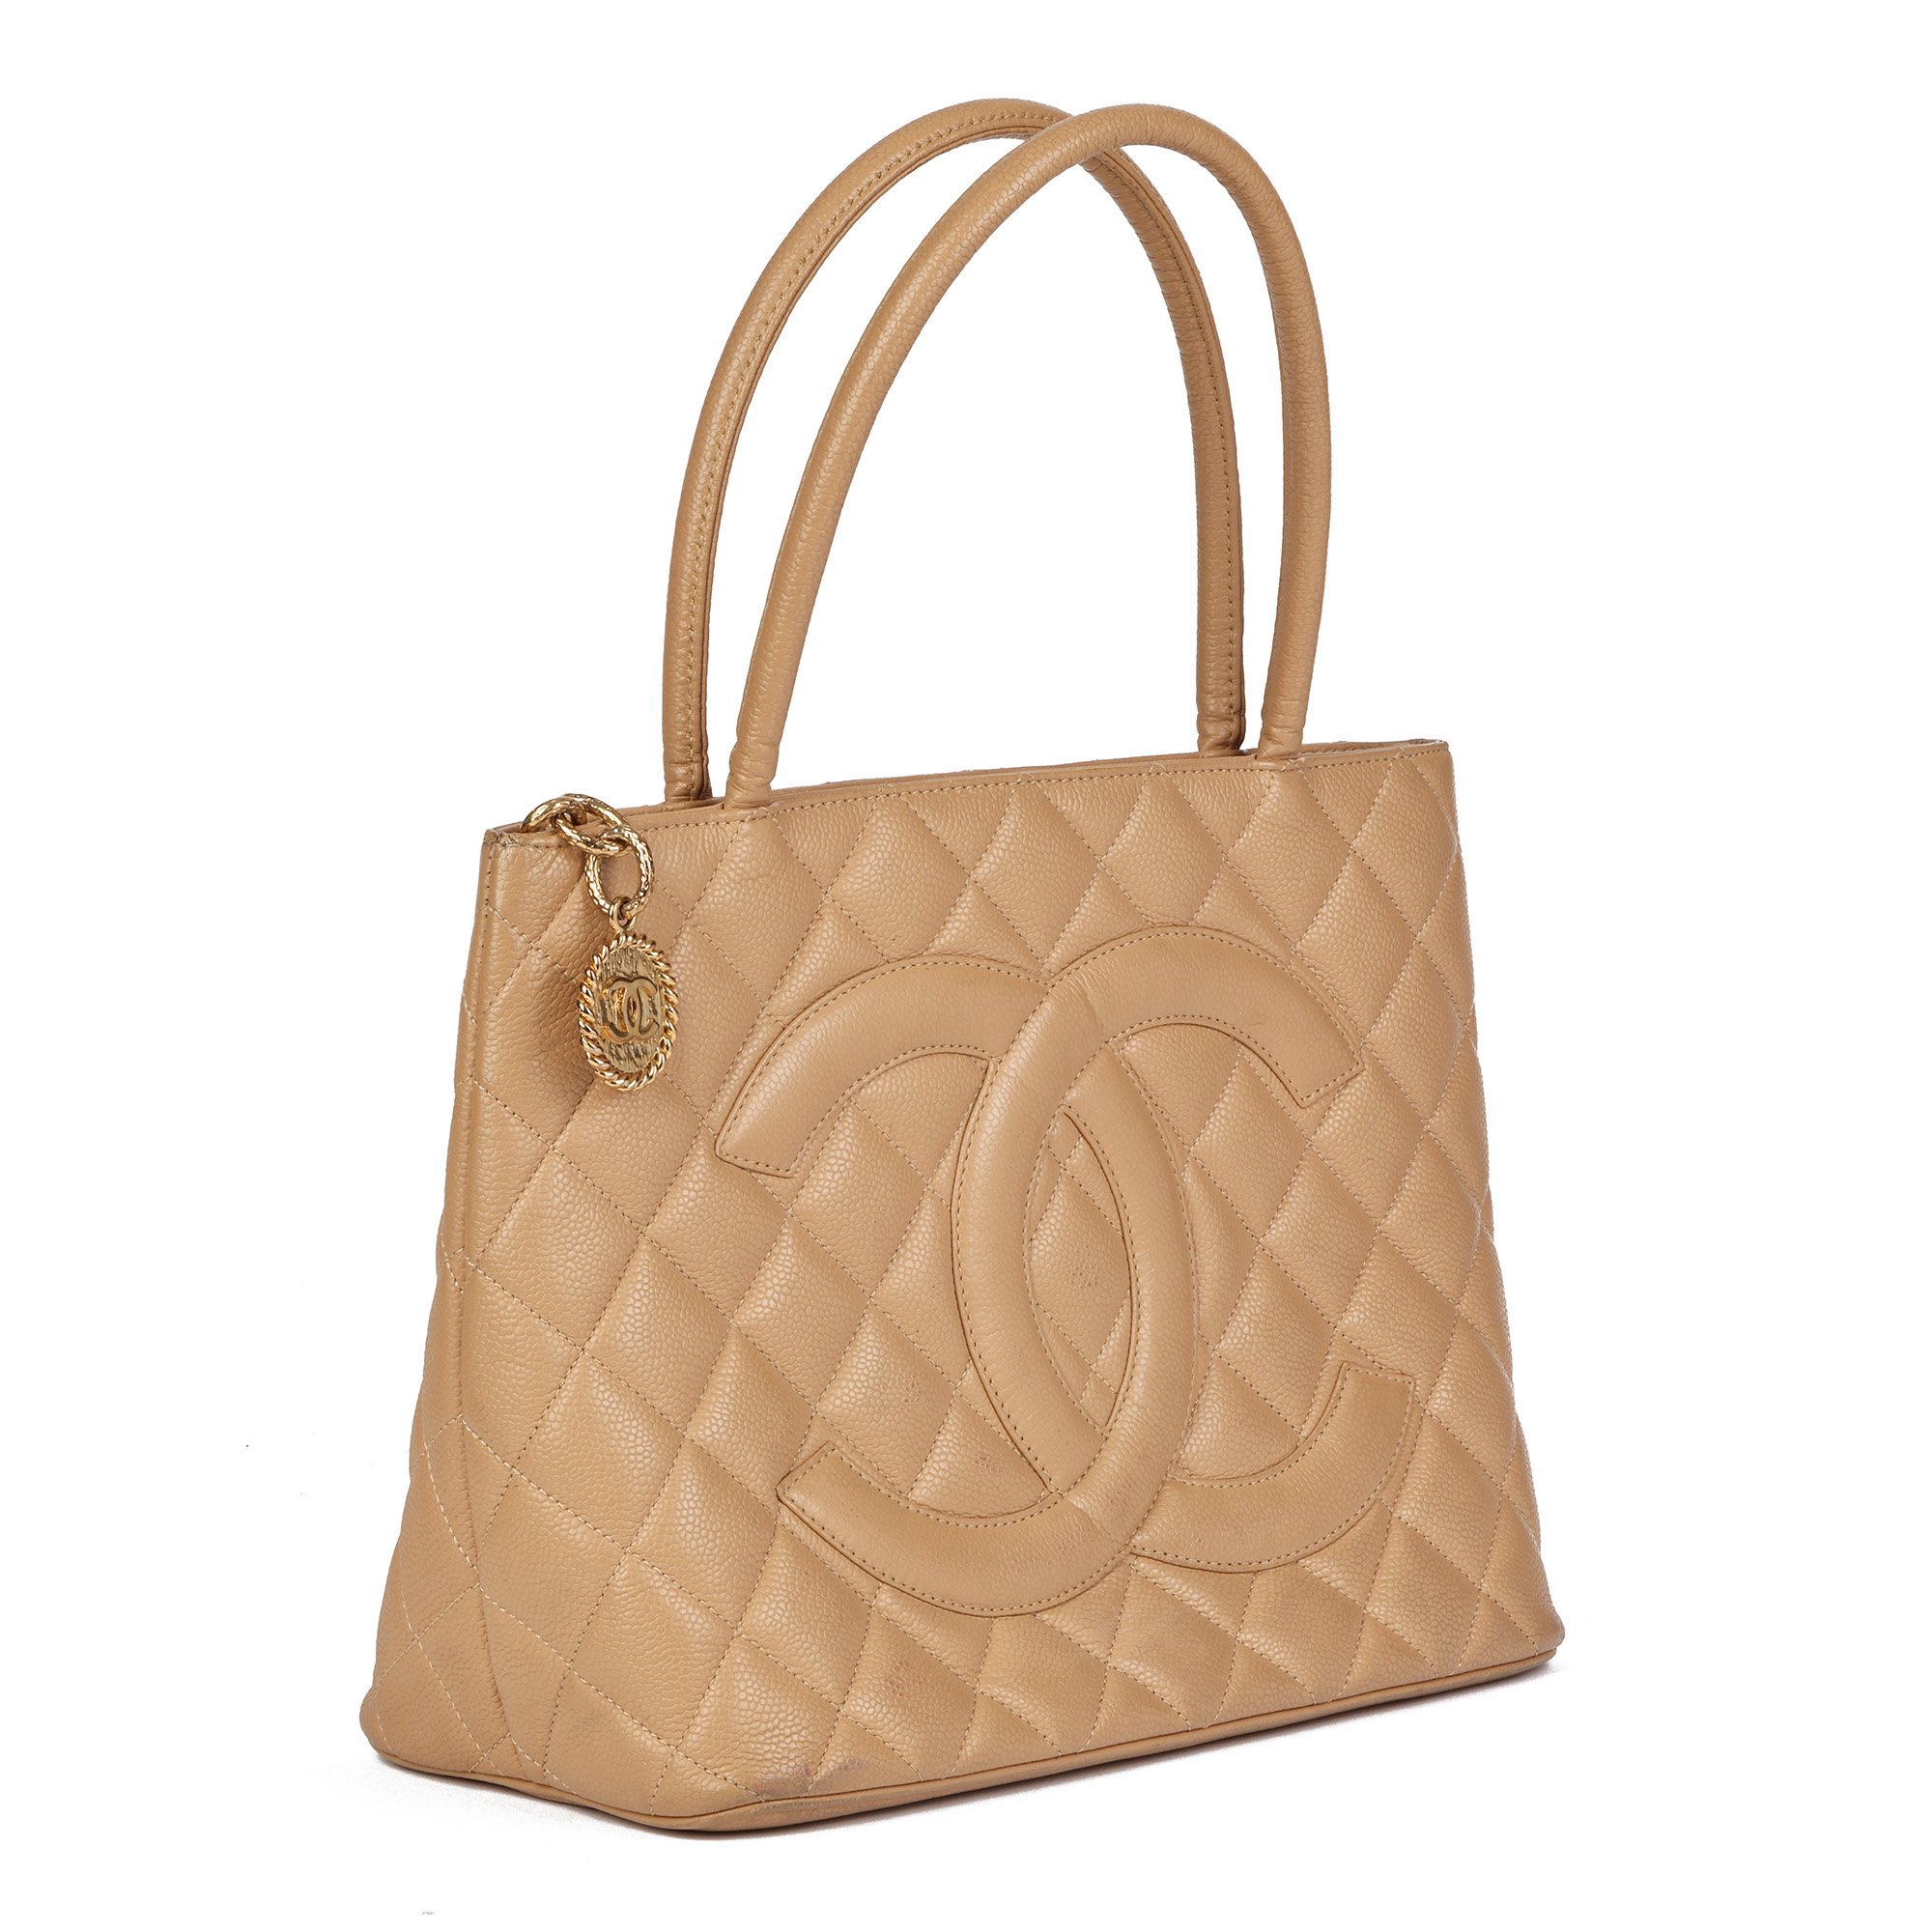 Chanel Beige Caviar Leather Medallion Tote